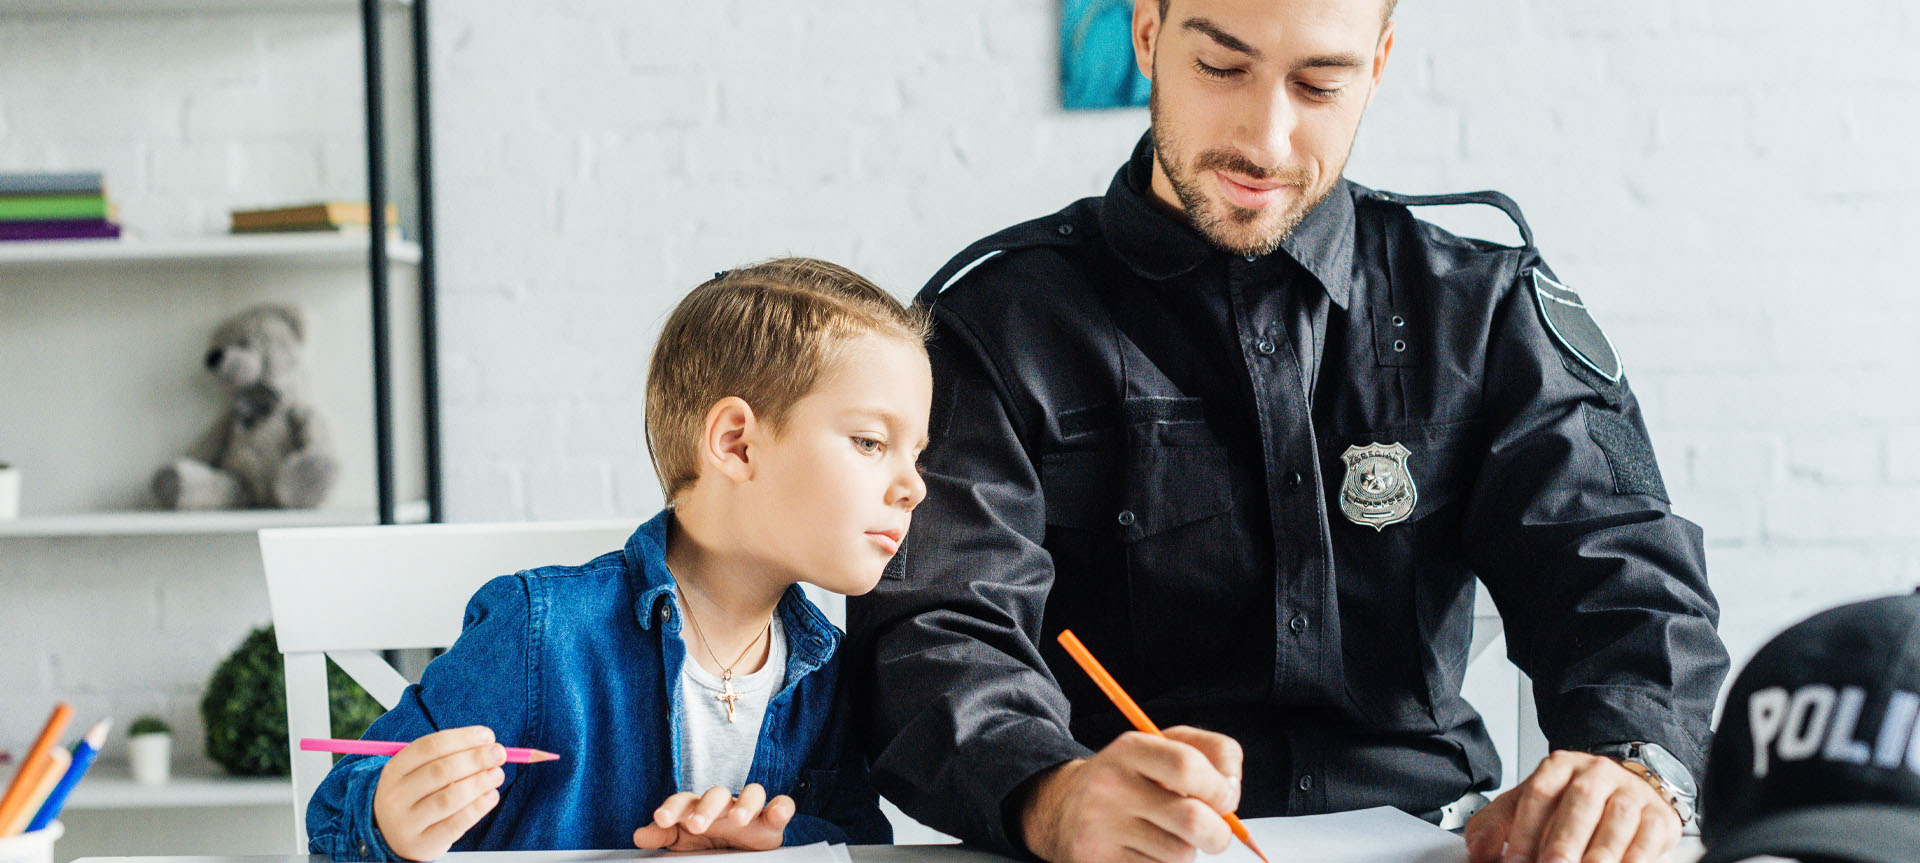 Image showing a police officer drawing with his son at home